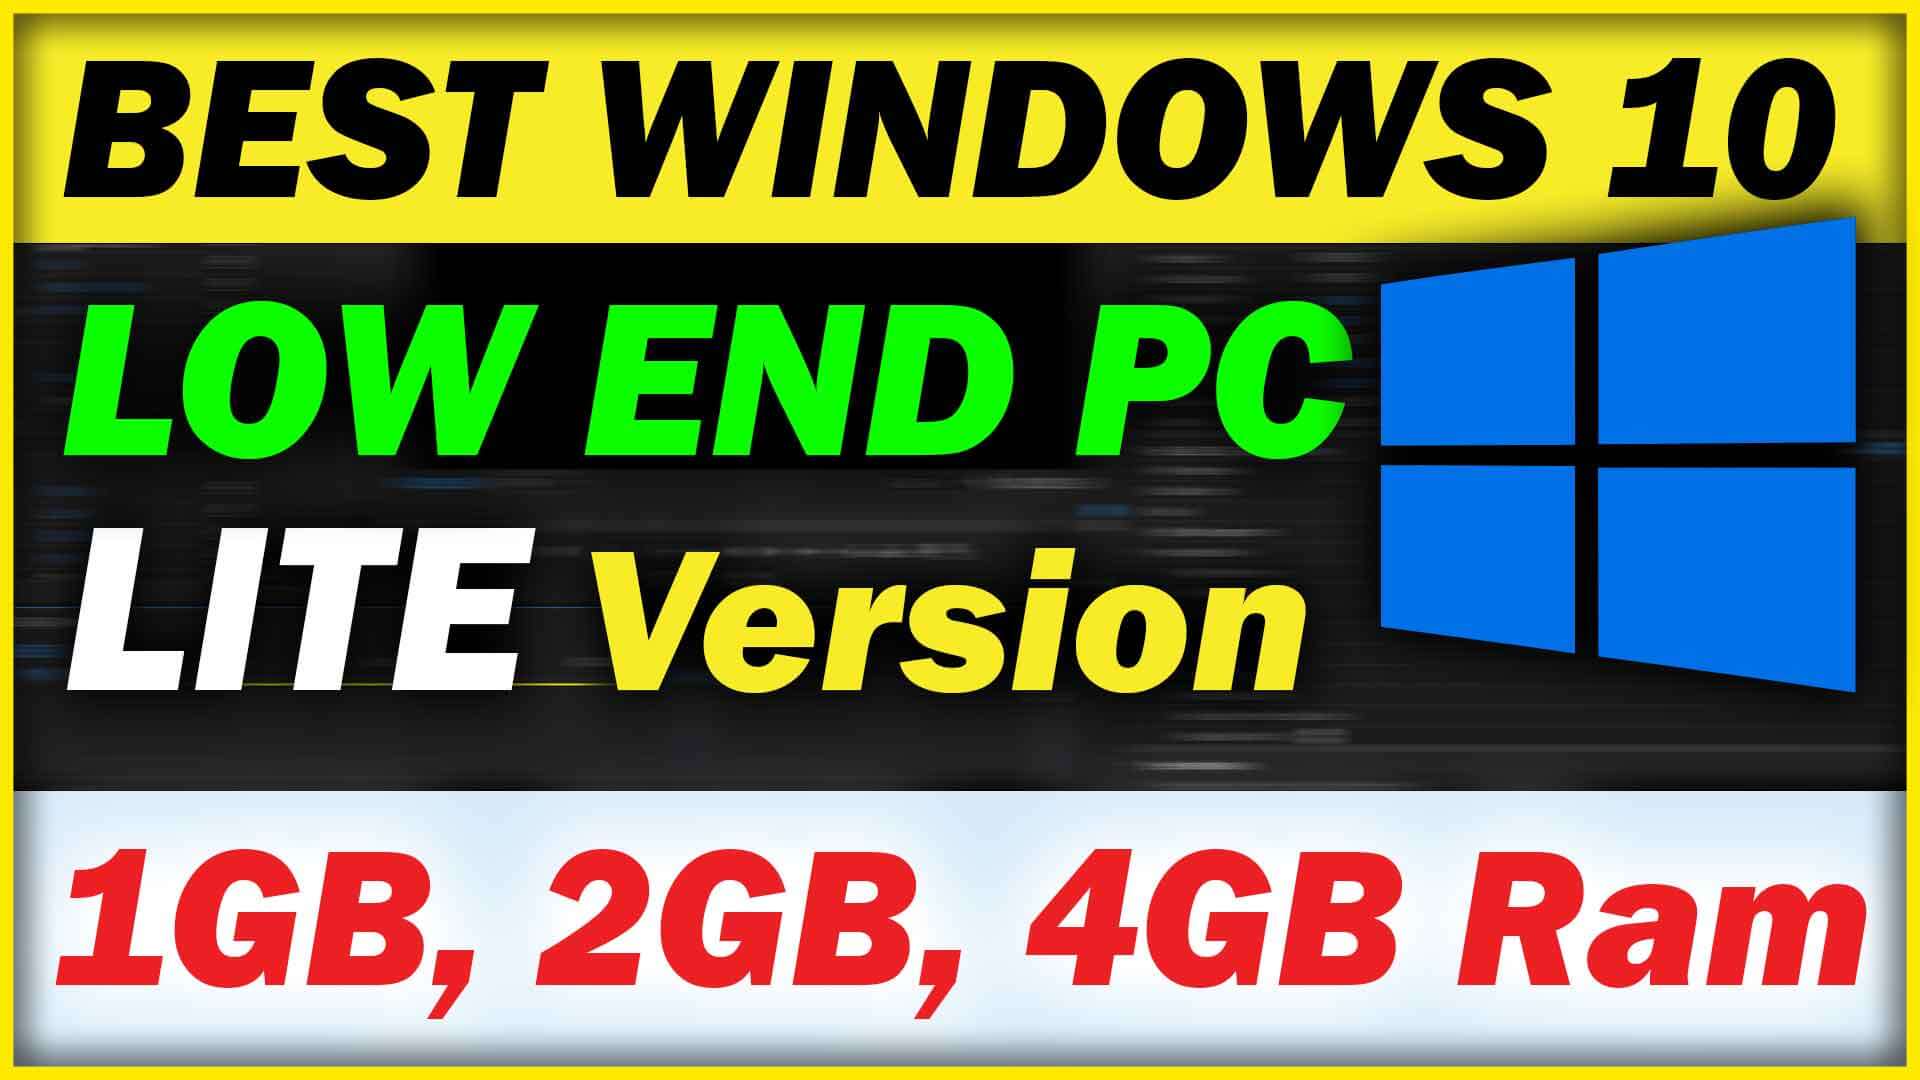 You are currently viewing Best Windows 10 for Low End Pc (Windows OS for 1gb ram pc) Windows 10 Lite version